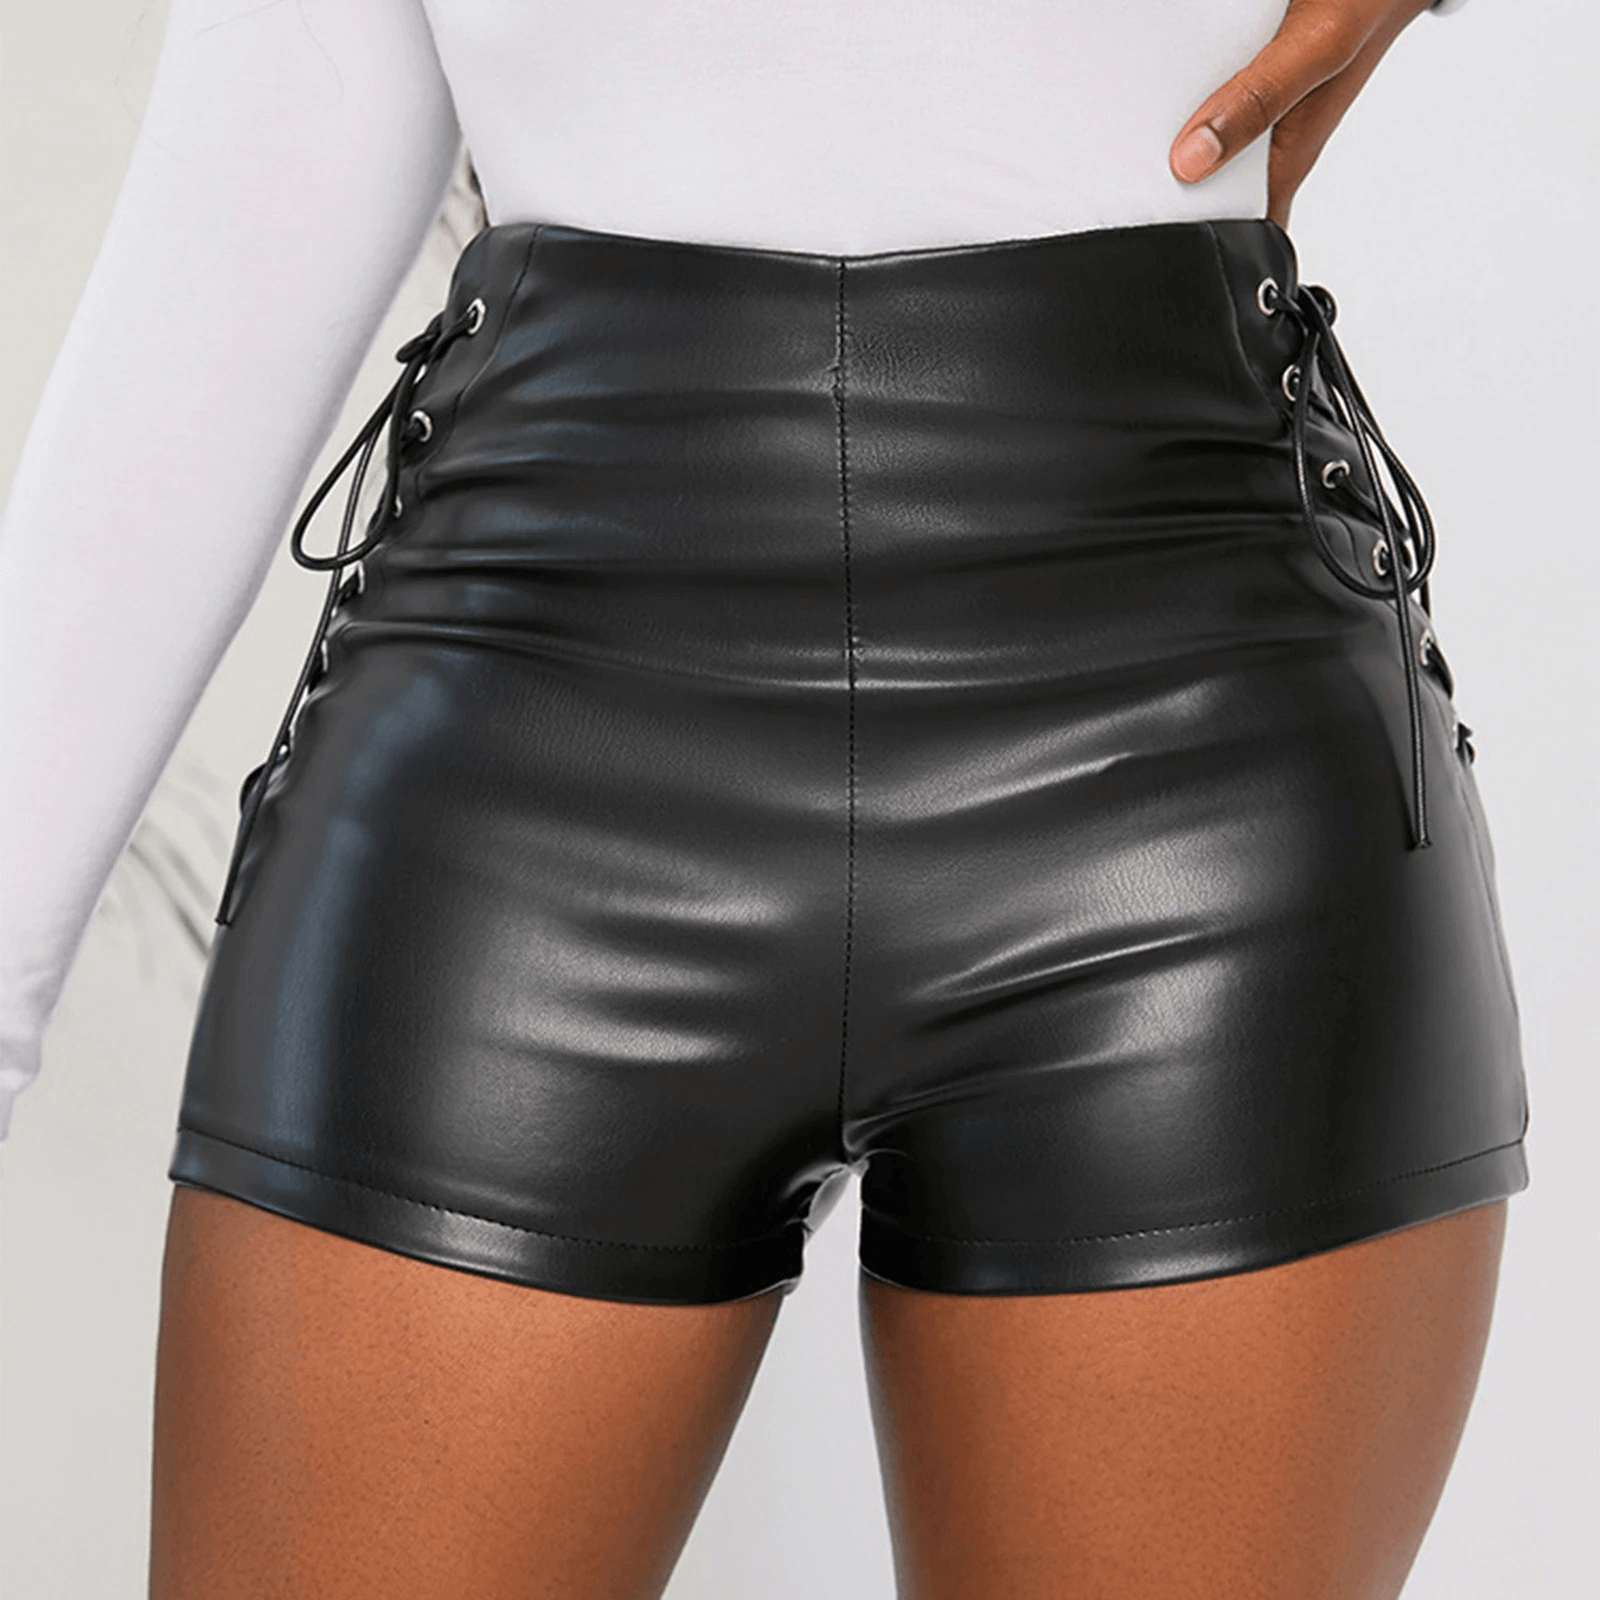 Faux Leather Short Shorts for Women / Sexy High Waist Female Mini Shorts in Black Colors